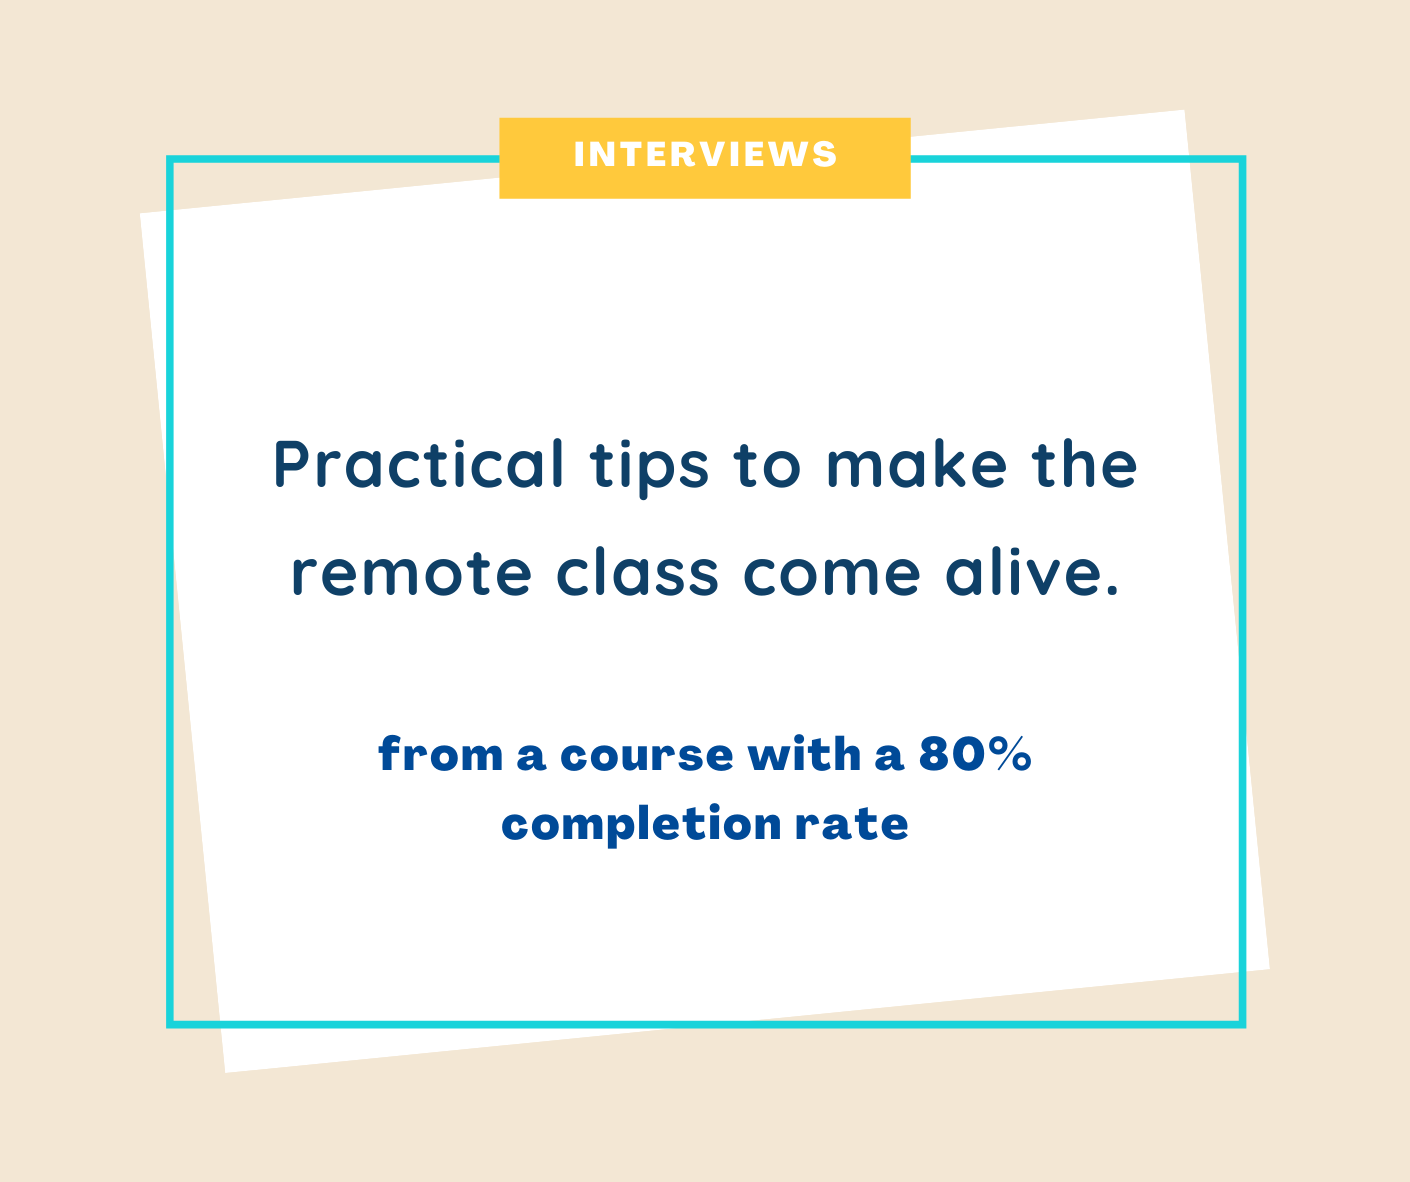 Practical tips to make the remote class come alive